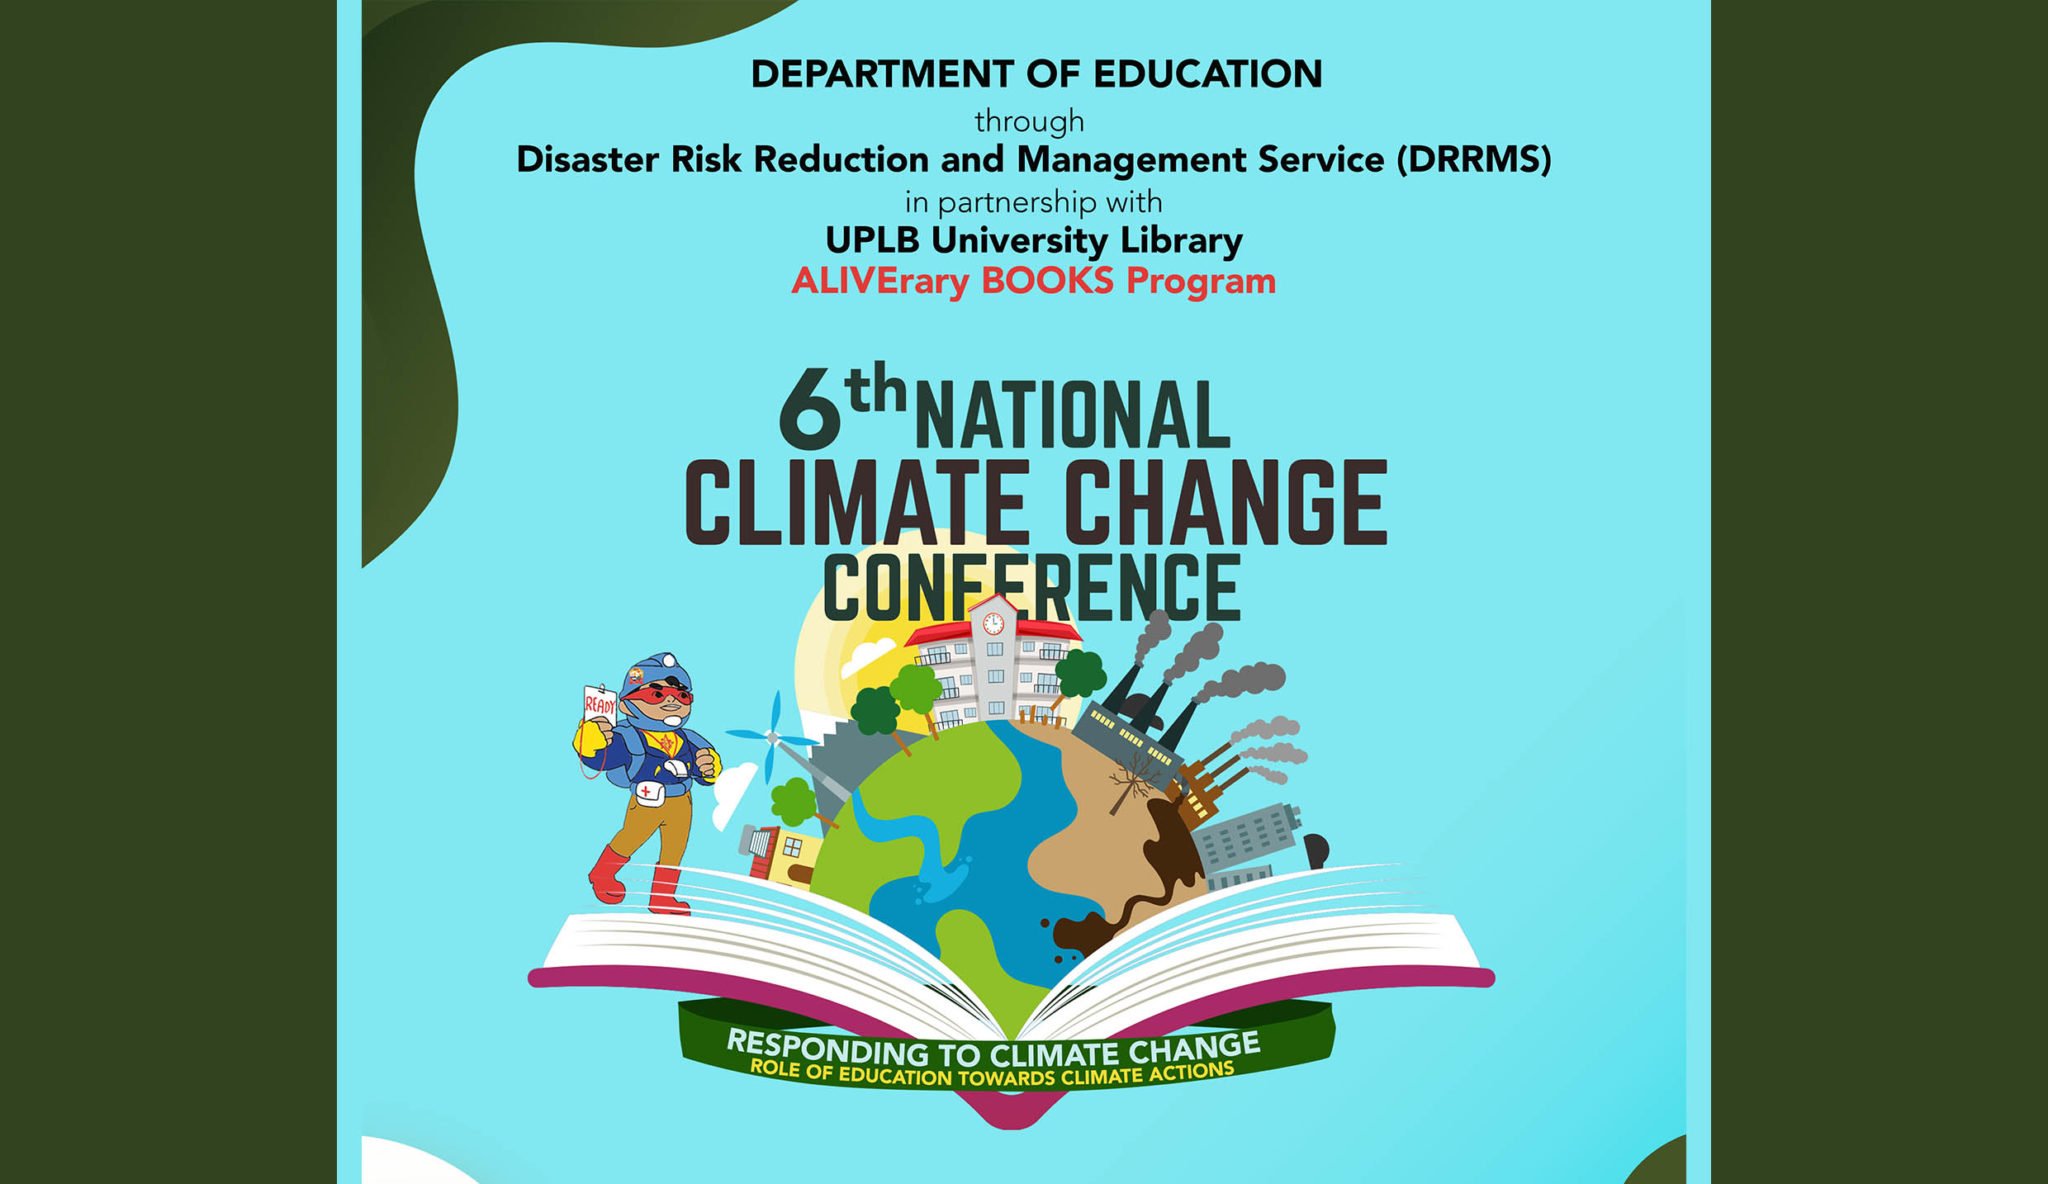 DepEd-DRRMS and UPLB UL-ALIVErary BOOKS Program collaborate in Natl. Climate Change Conference